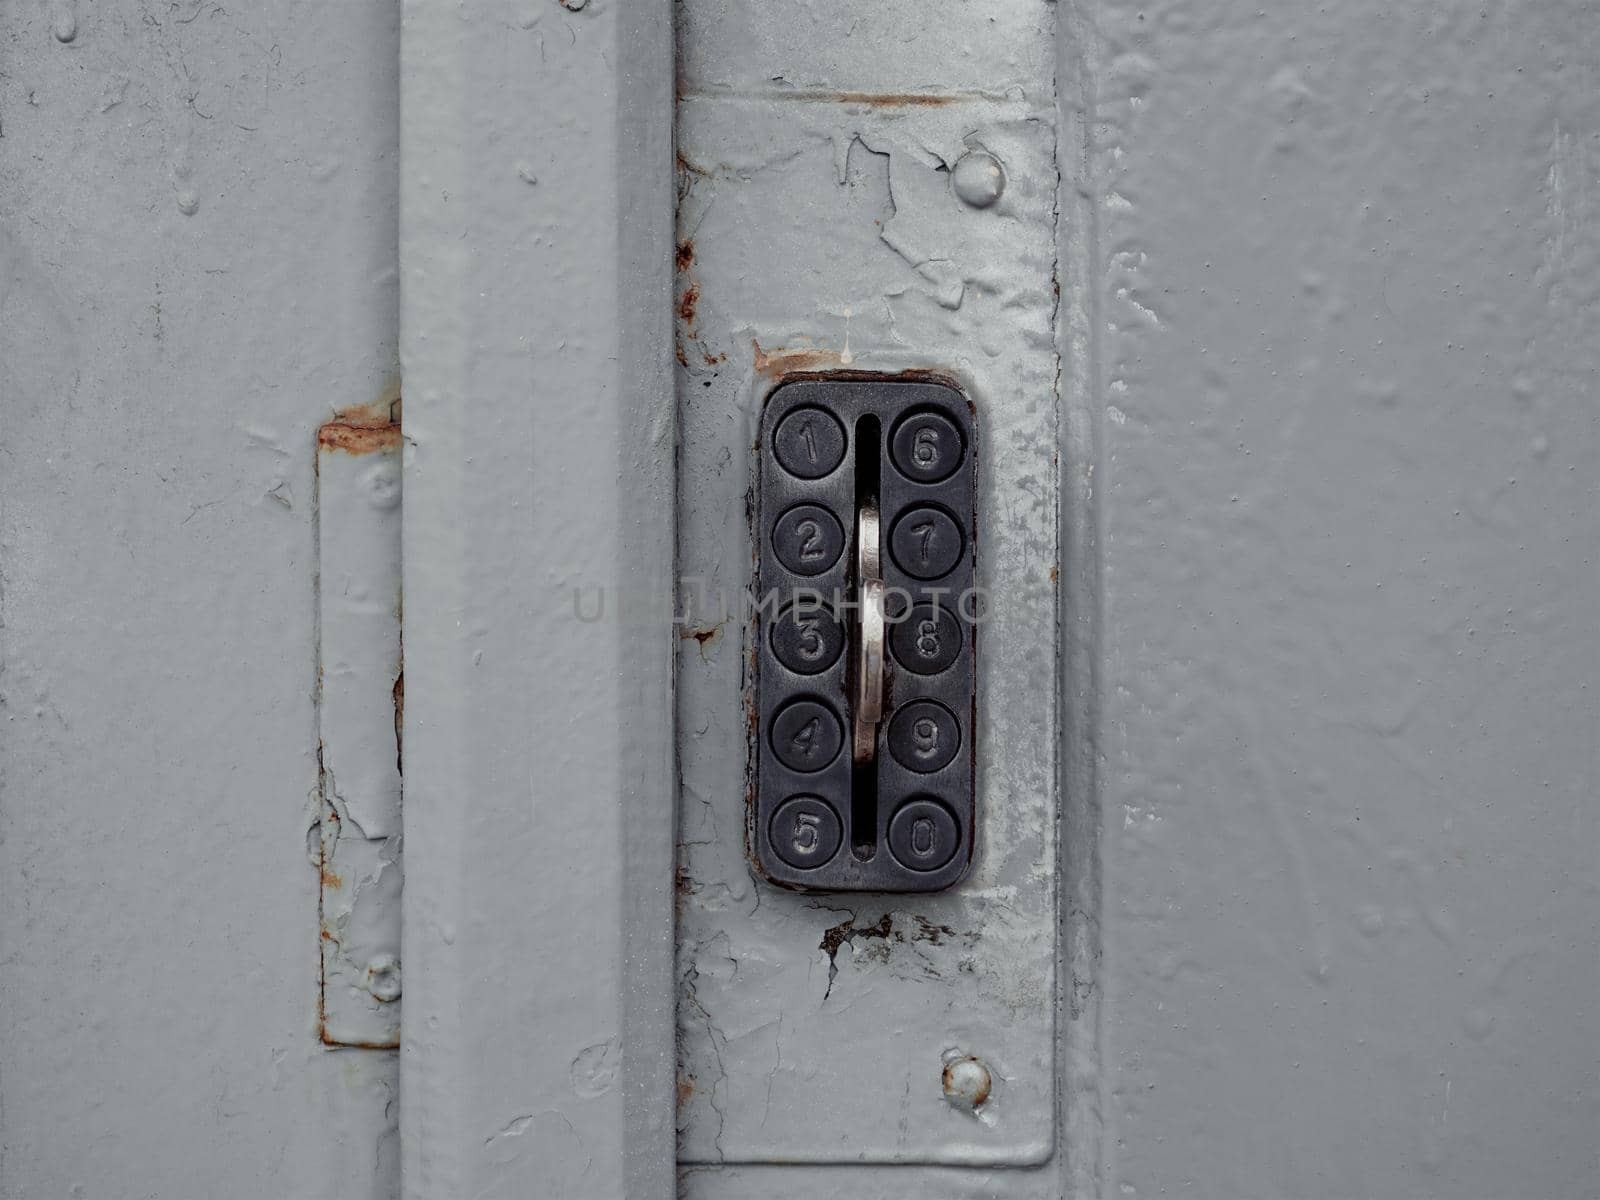 Secure password on keyboard for opening house door. Old system of protect and safe in the past. Vintage combination lock with buttons on the grey wooden grunge door to unlock.